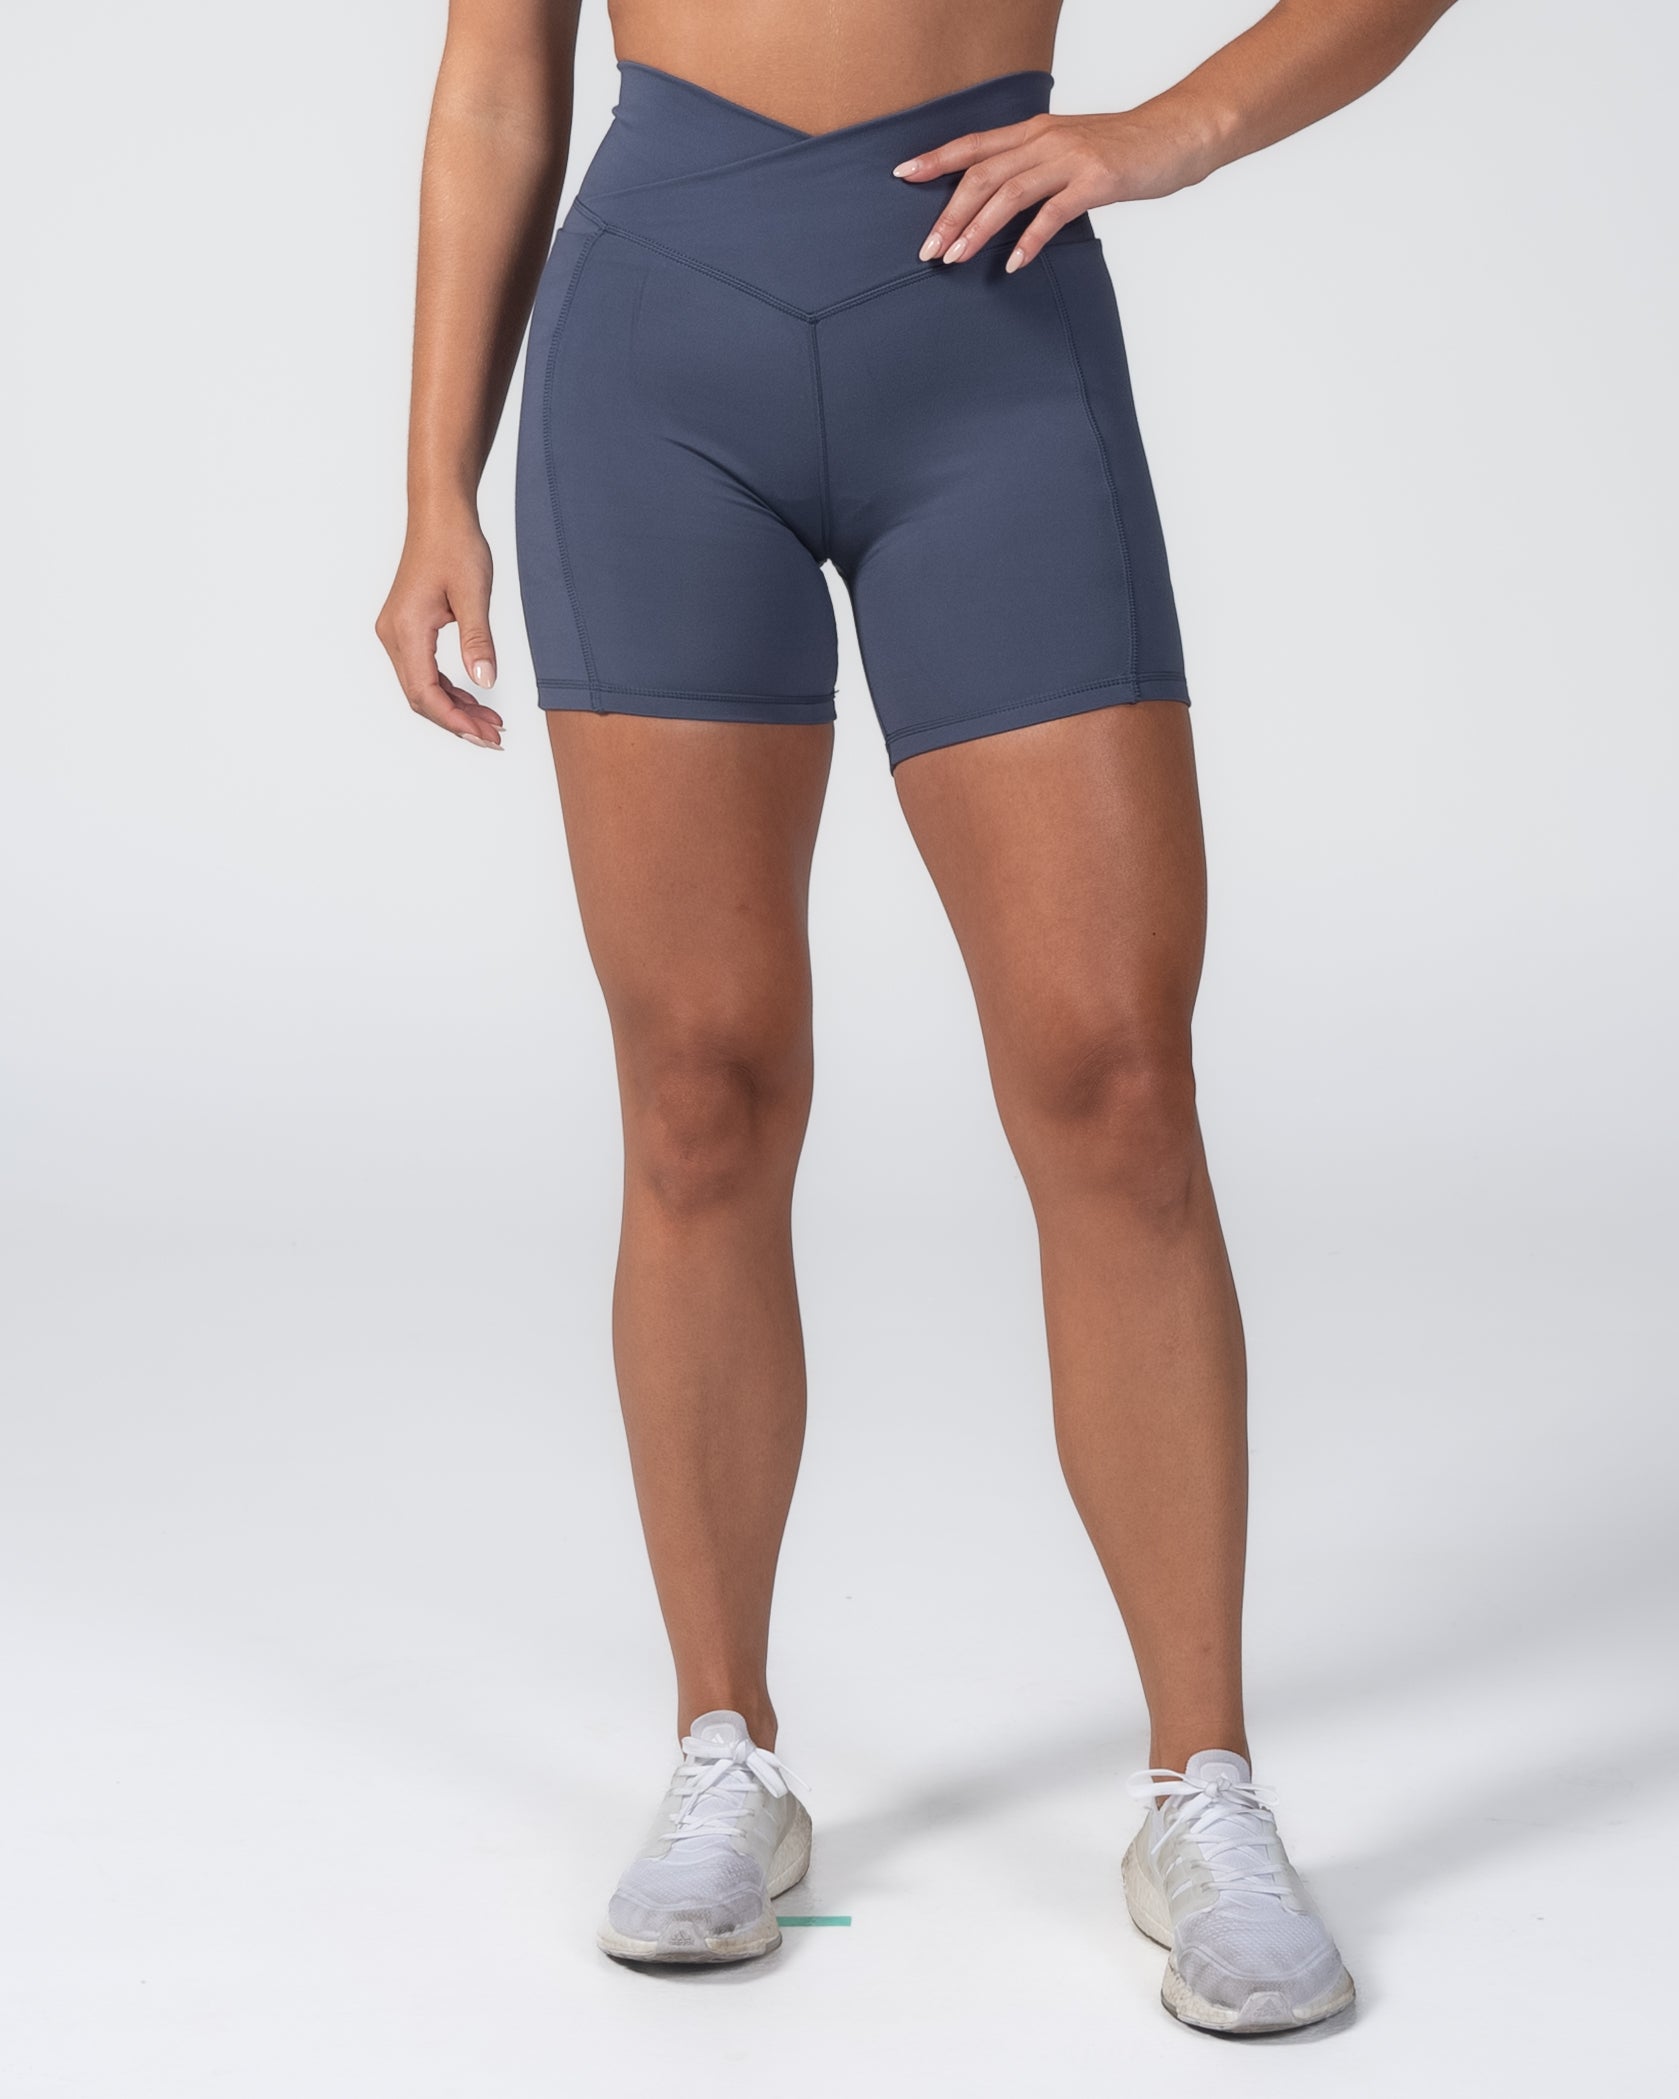 senita athletics chillin shorts - Click Community Blog: Helping you take  better pictures one day at a time